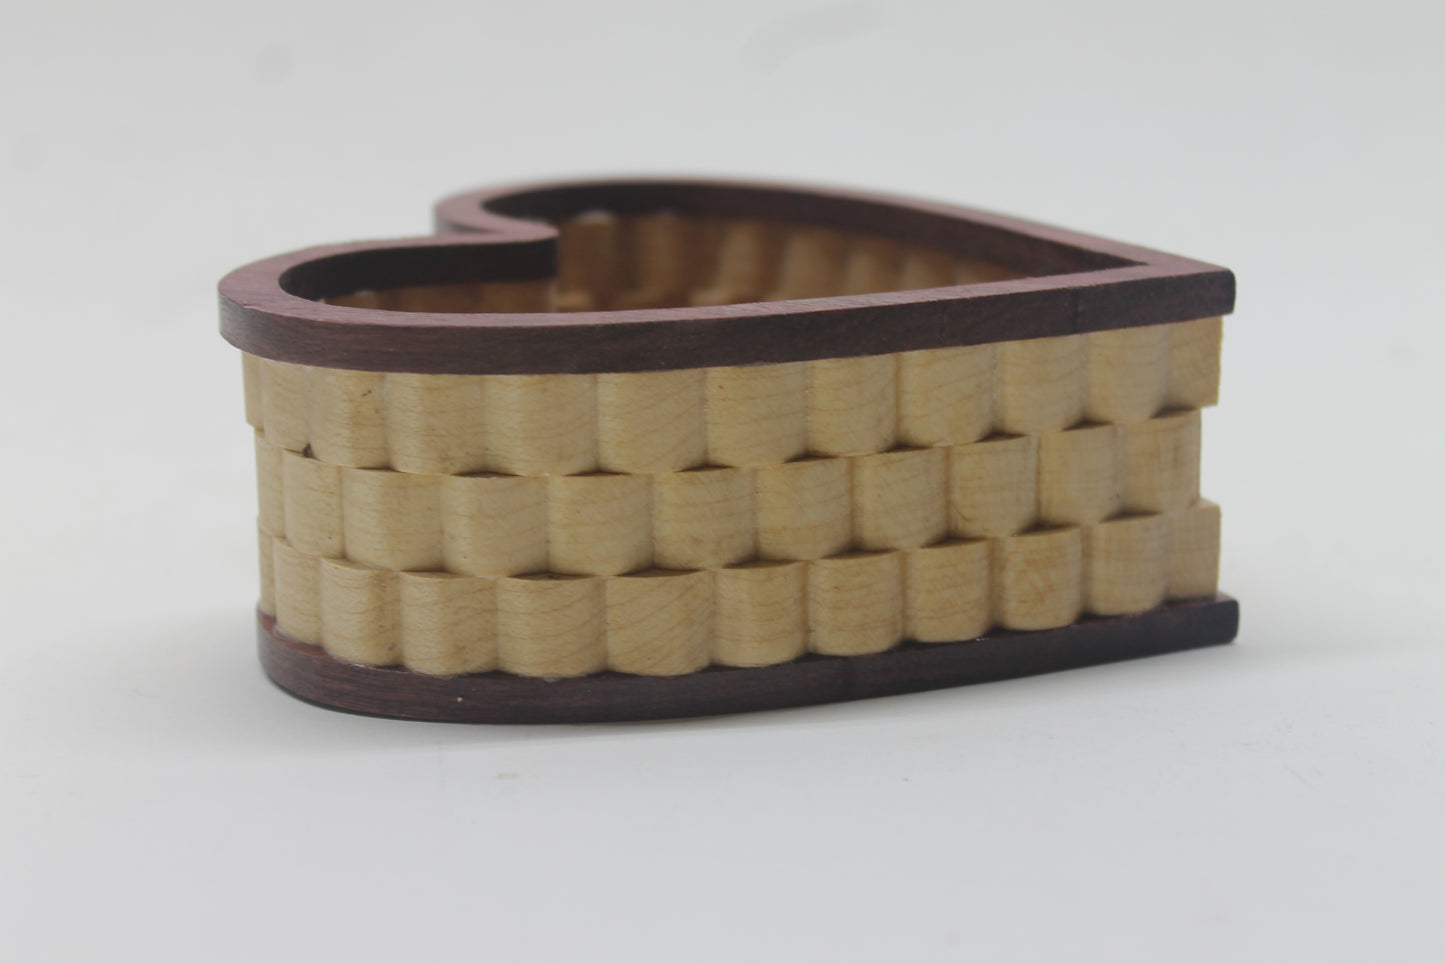 Heart-shaped handcrafted wood jewelry basket, made from purpleheart and maple